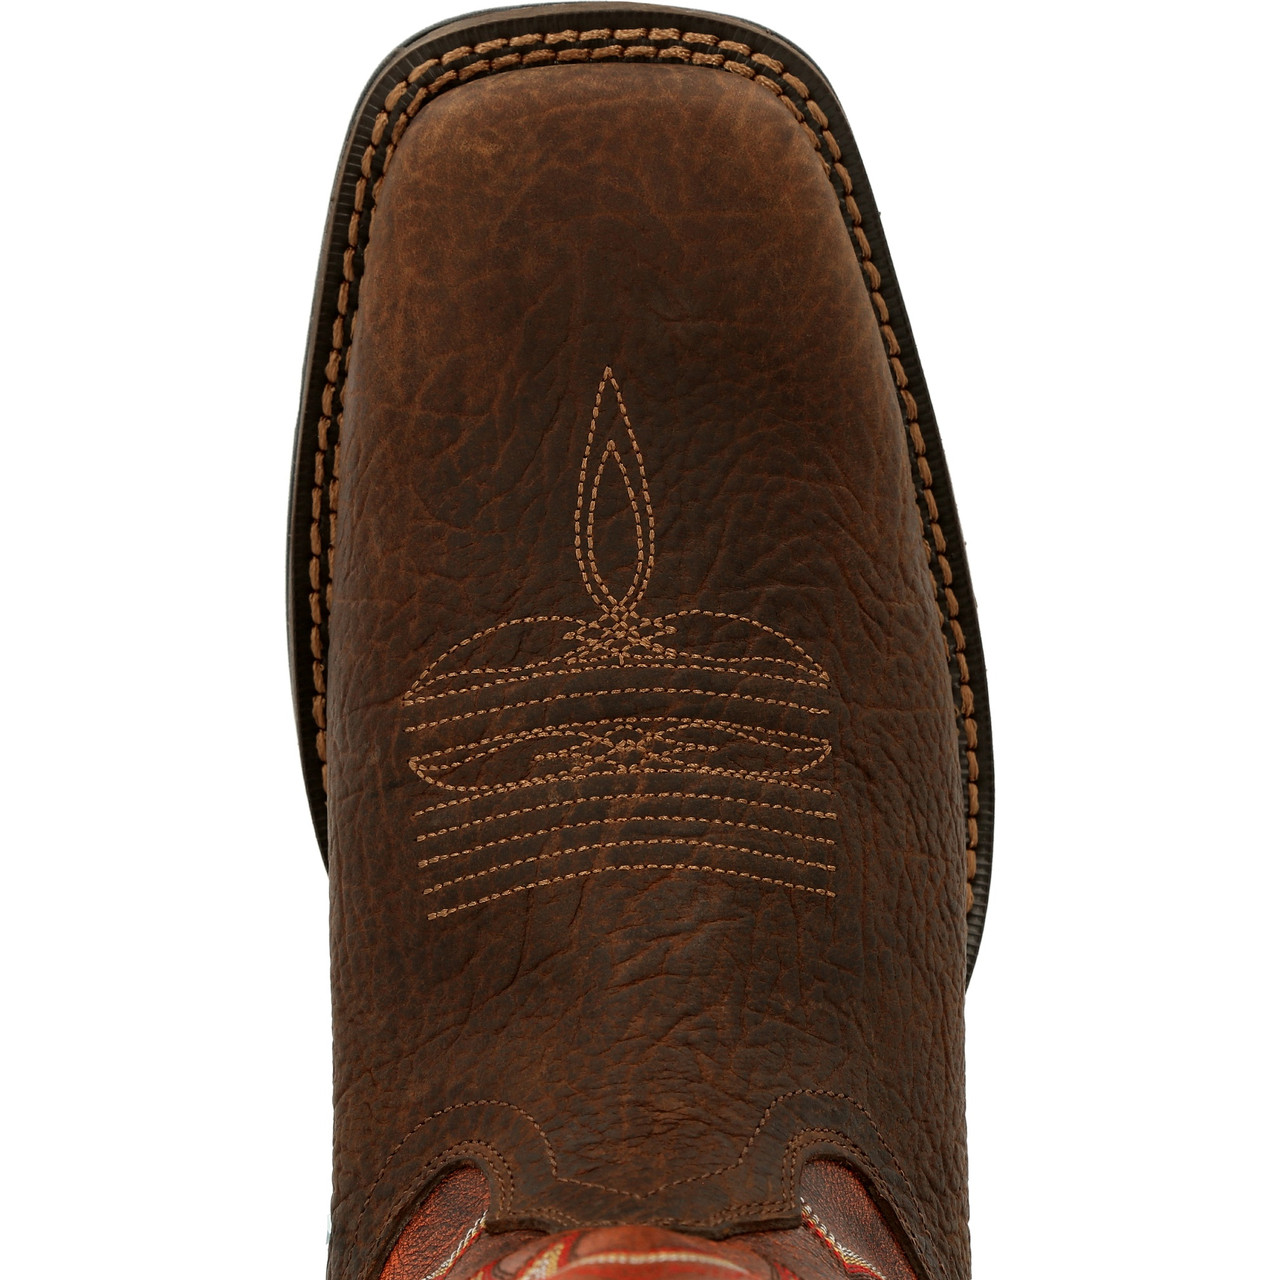 REBEL™ BY DURANGO® 12" BROWN VENTILATED WESTERN BOOTS DDB0327